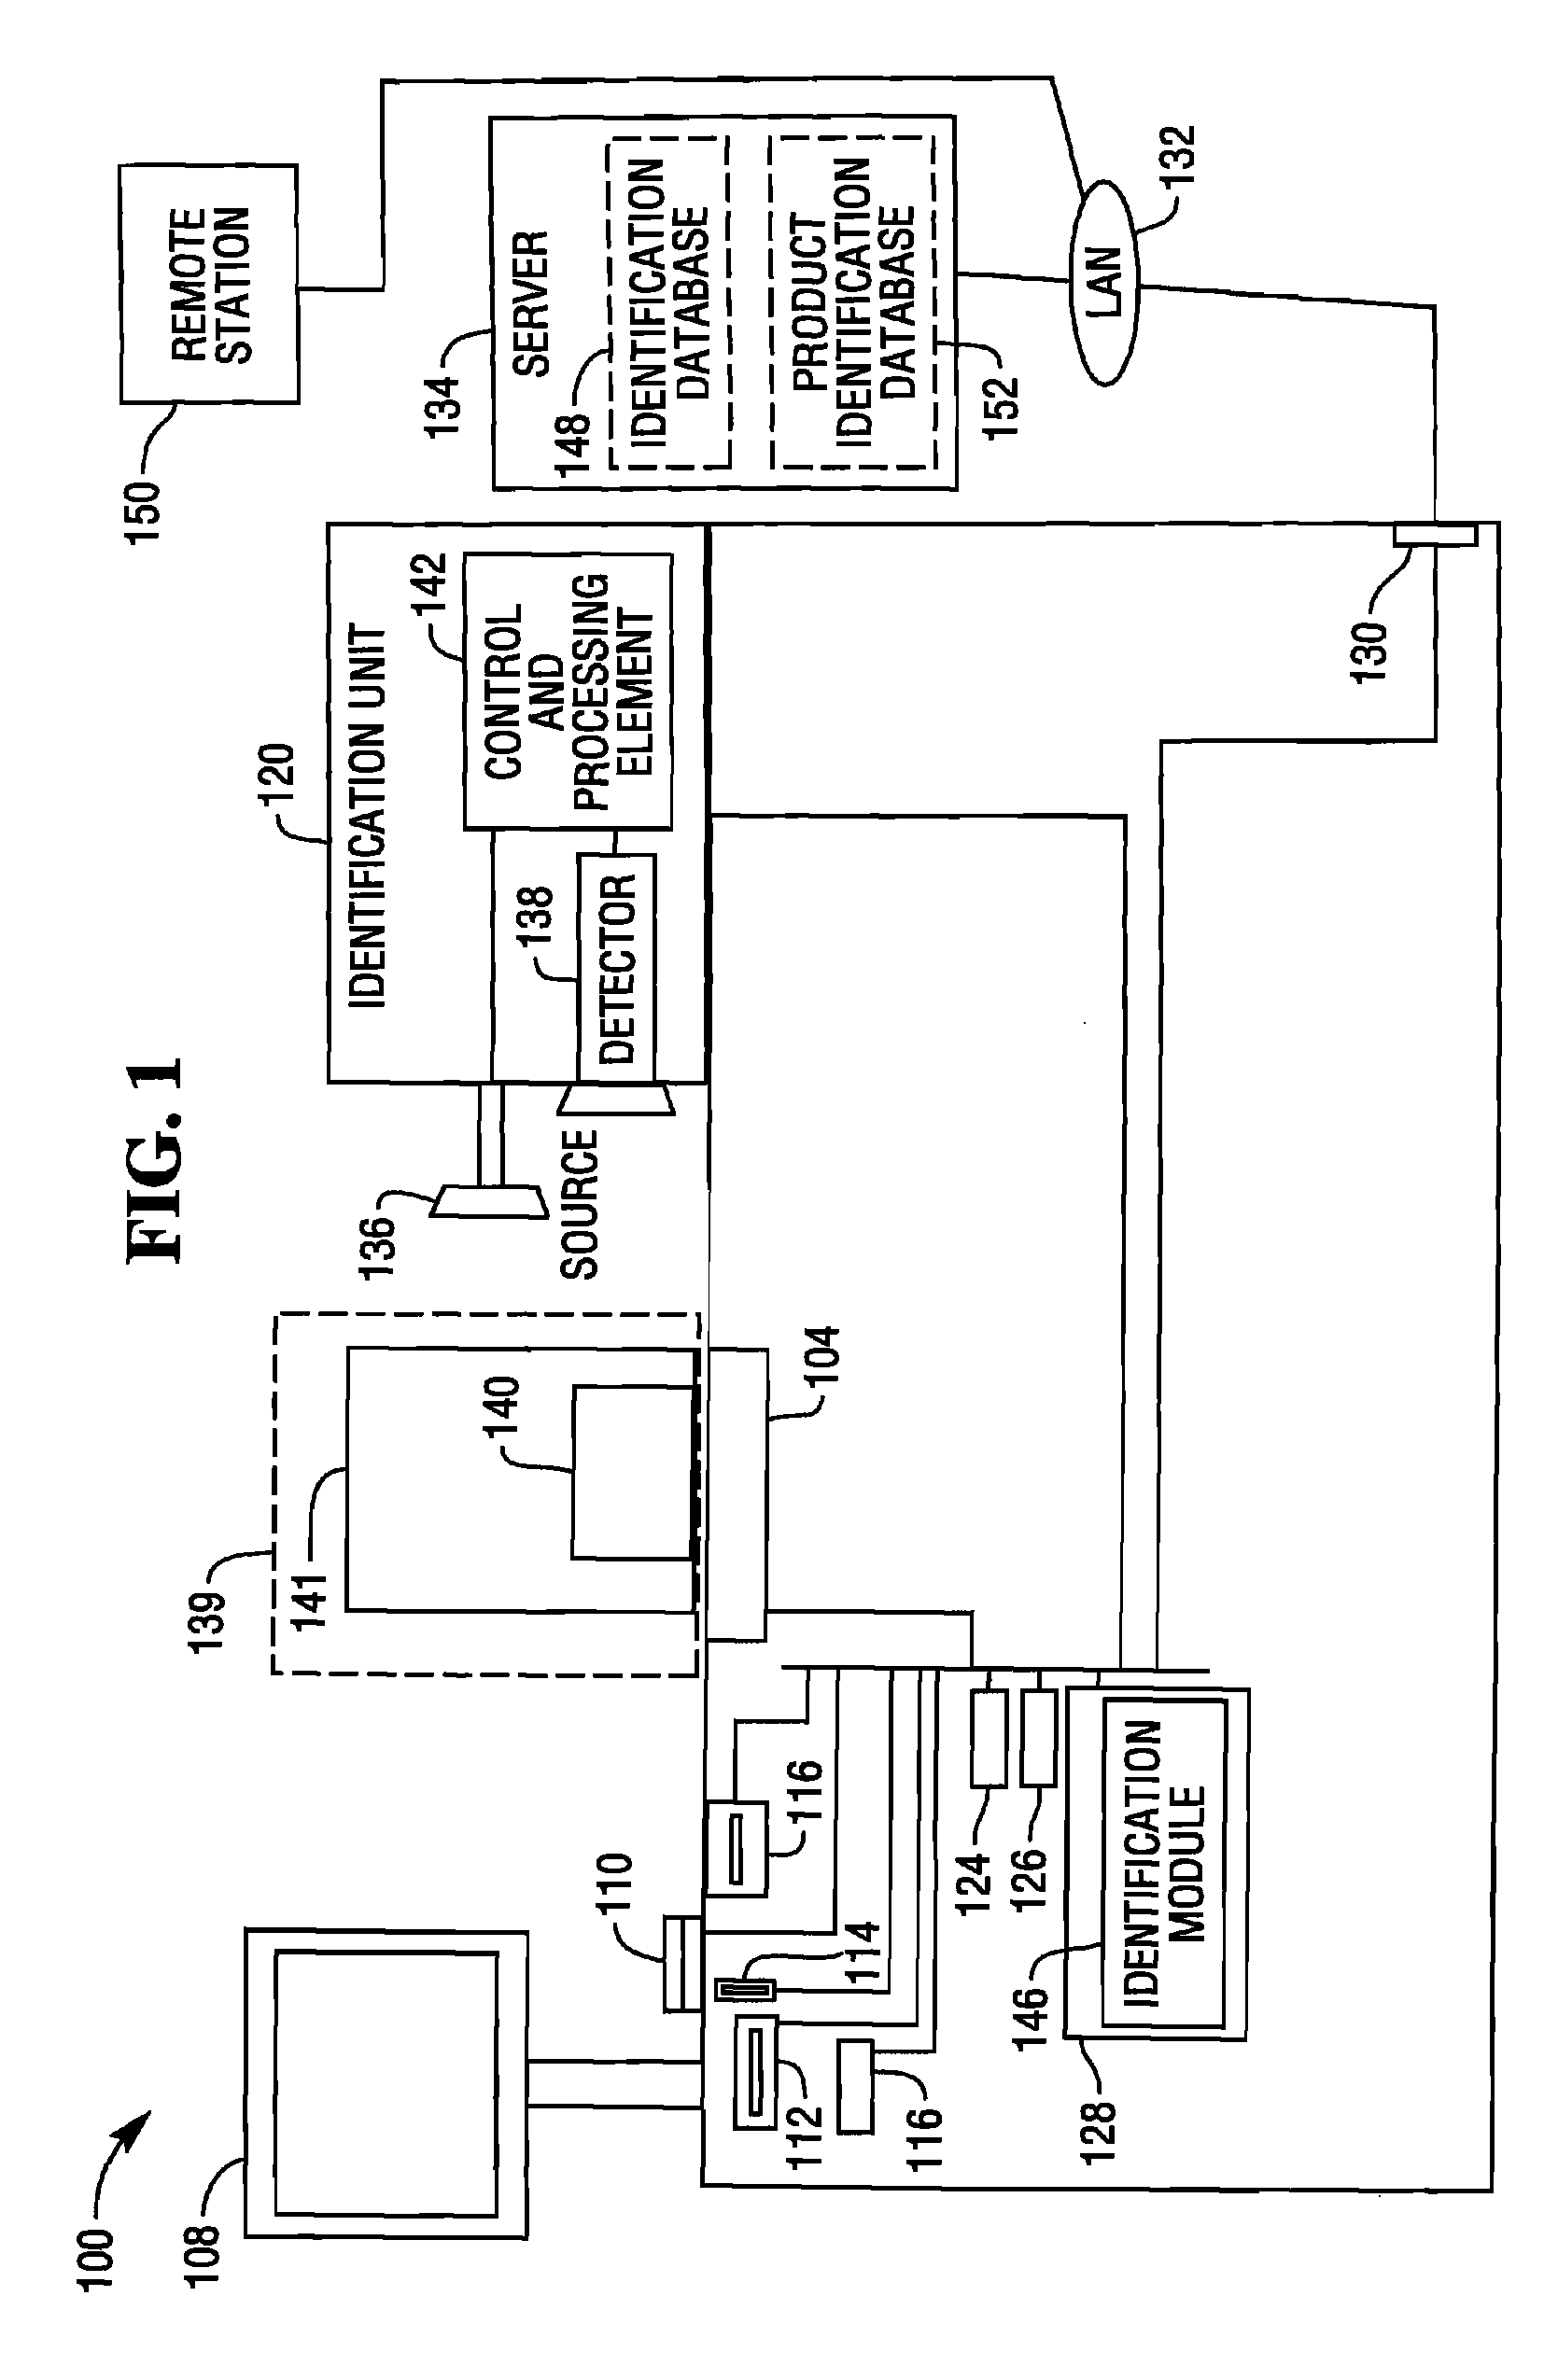 Methods and apparatus for automated product identification in point of sale applications